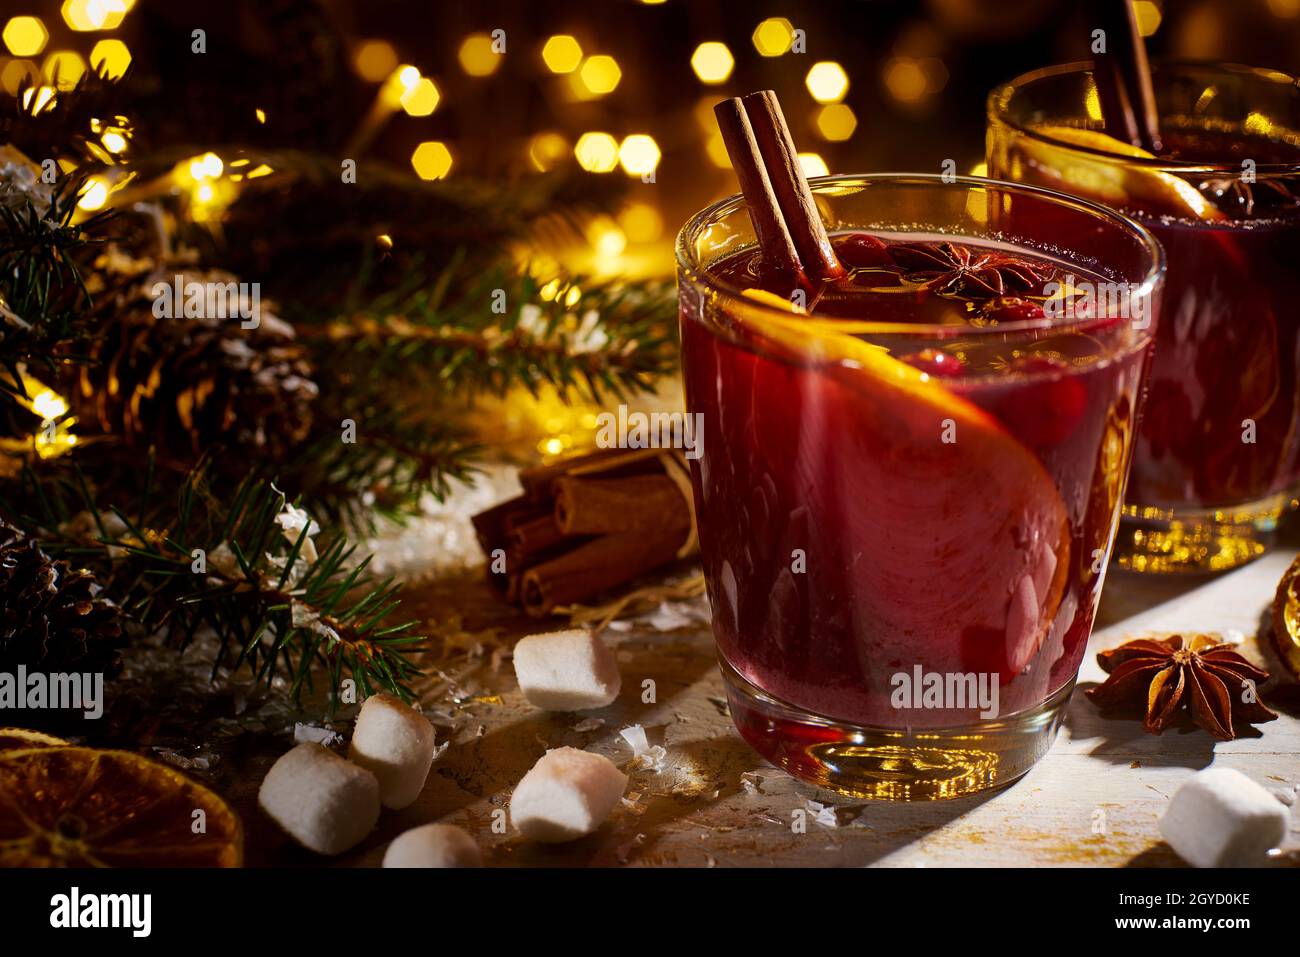 Mulled wine with spices and fruits on wooden table Stock Photo